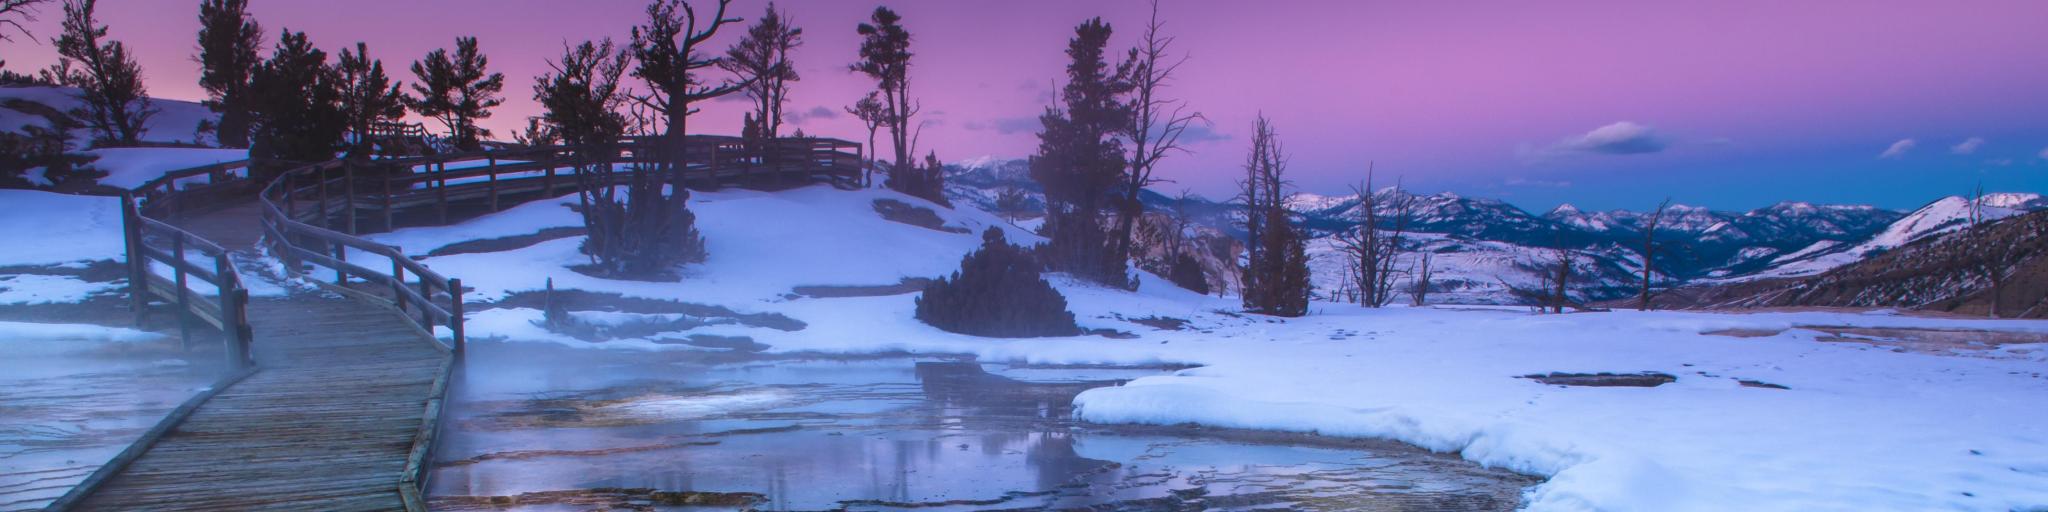 Yellowstone National Park, Wyoming, USA with a beautiful cold winter sunset.